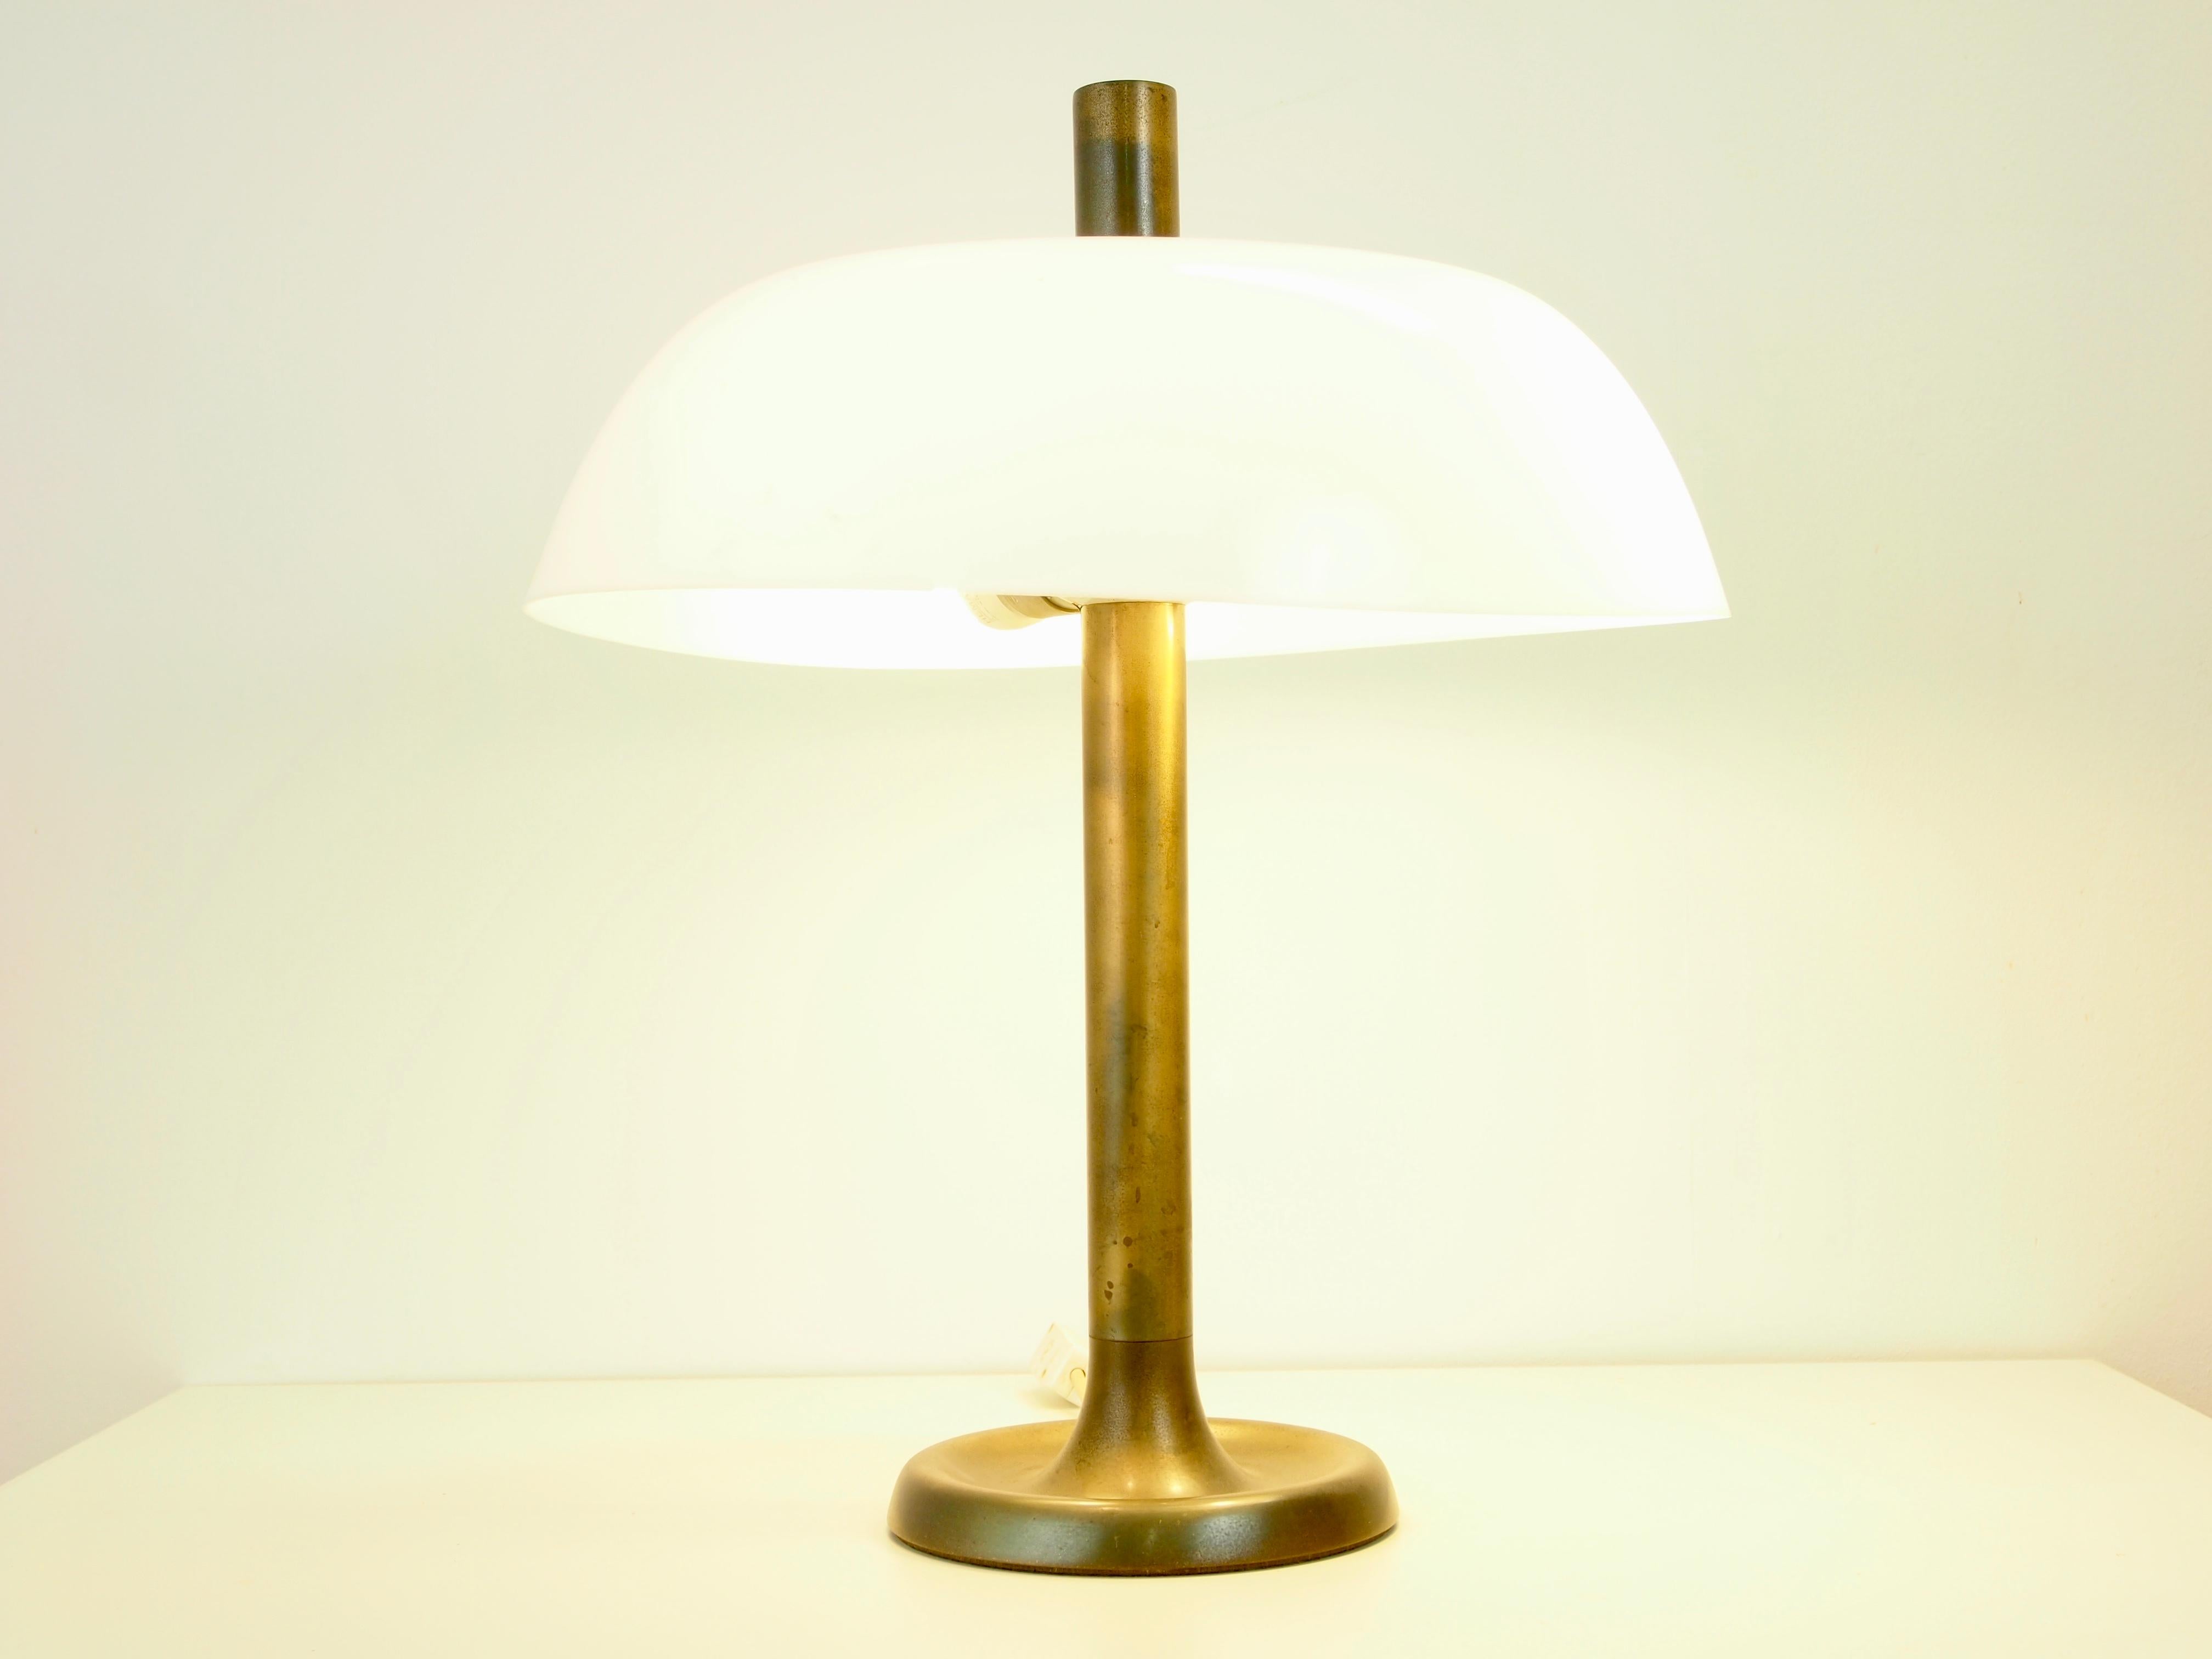 Amazing vintage midcentury German table or desk lamp produced by Hillebrand with a patinated brass 